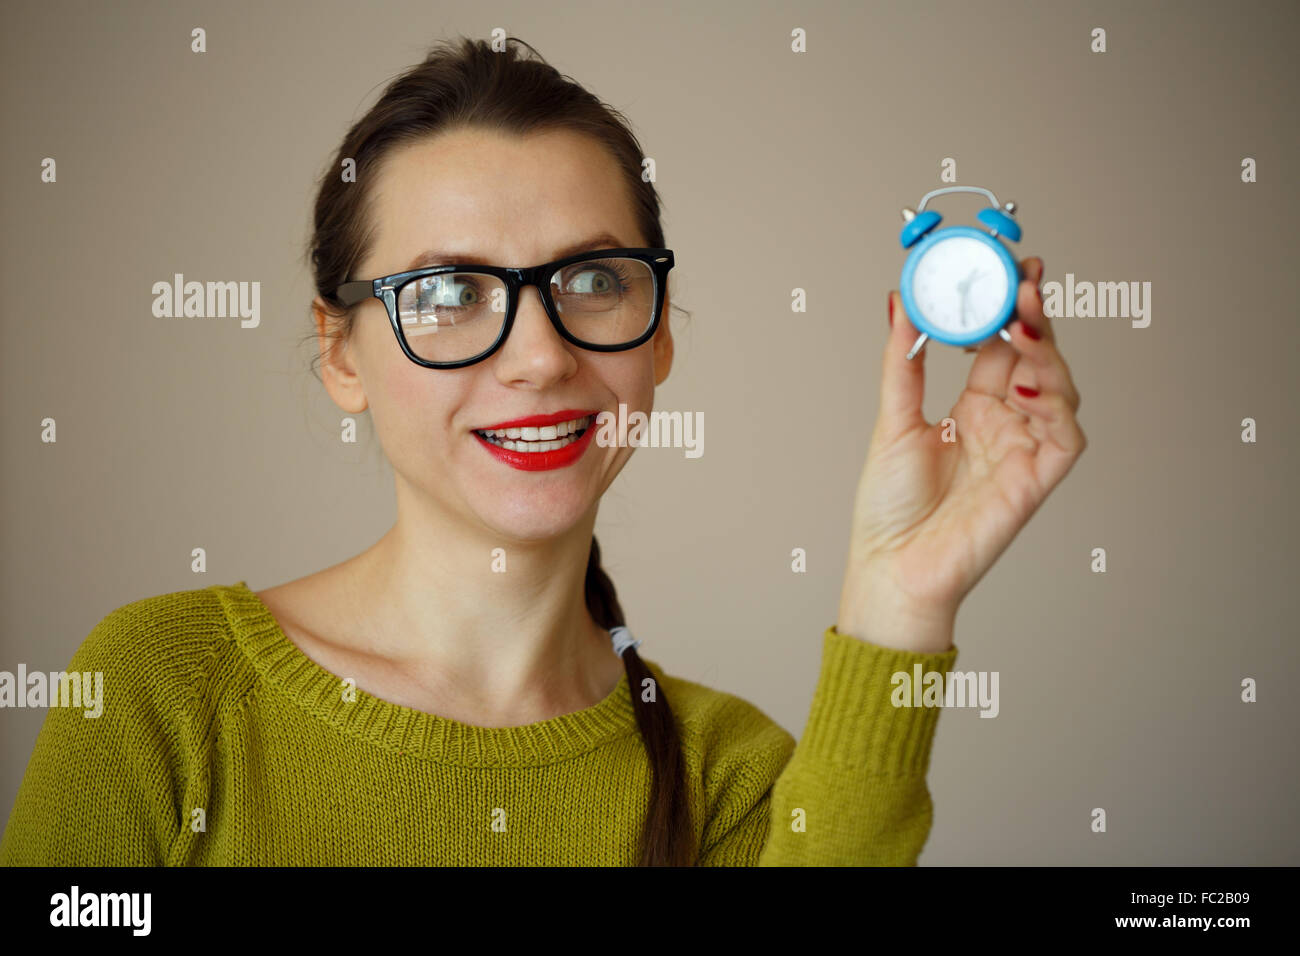 Little blue alarm clock in the hands of an emotional young woman, concept of saving time Stock Photo